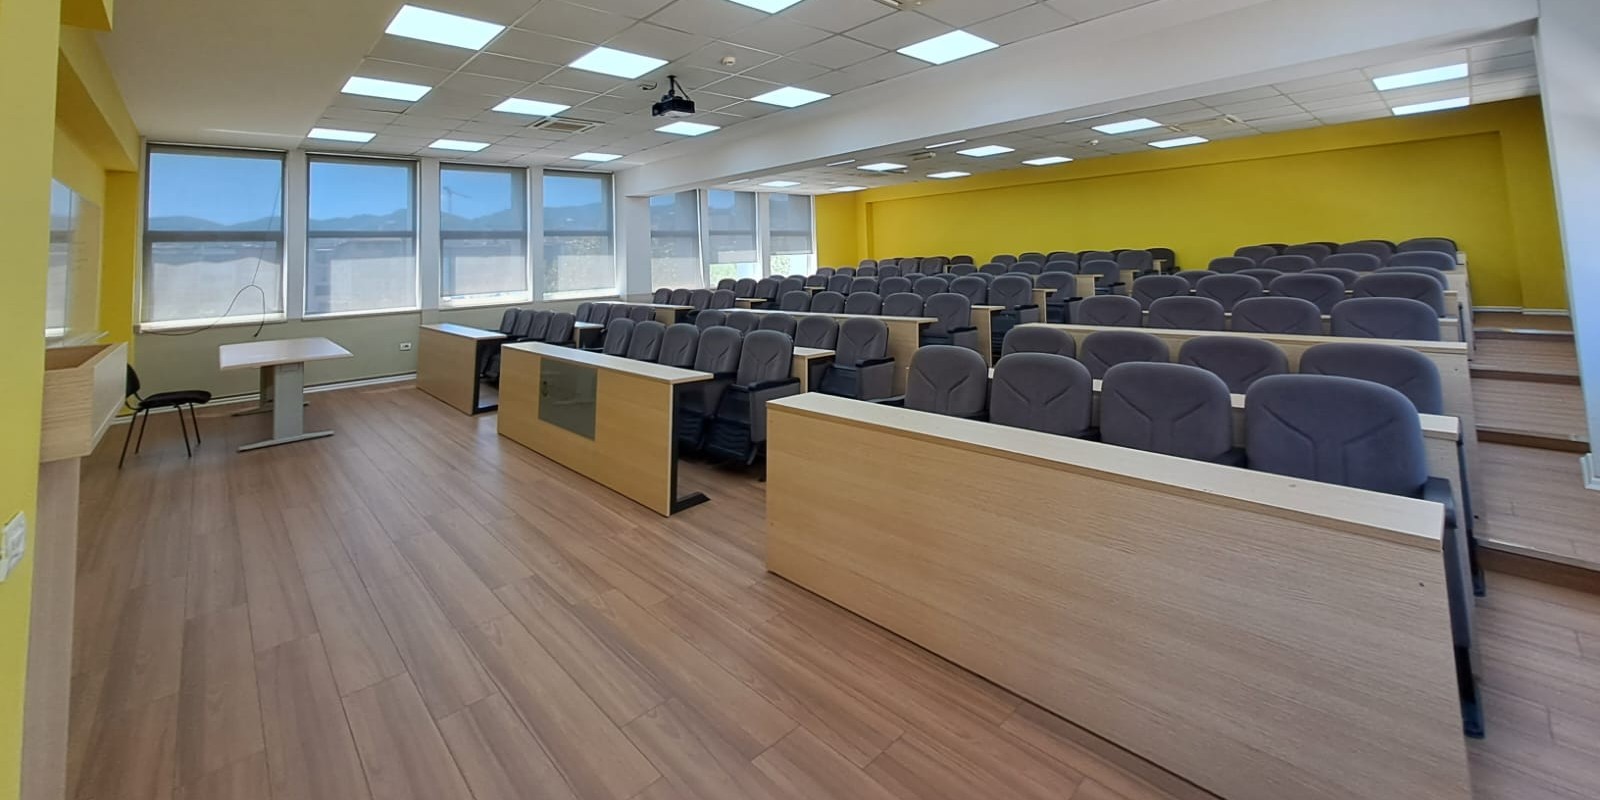 Image of the conference room at the venue